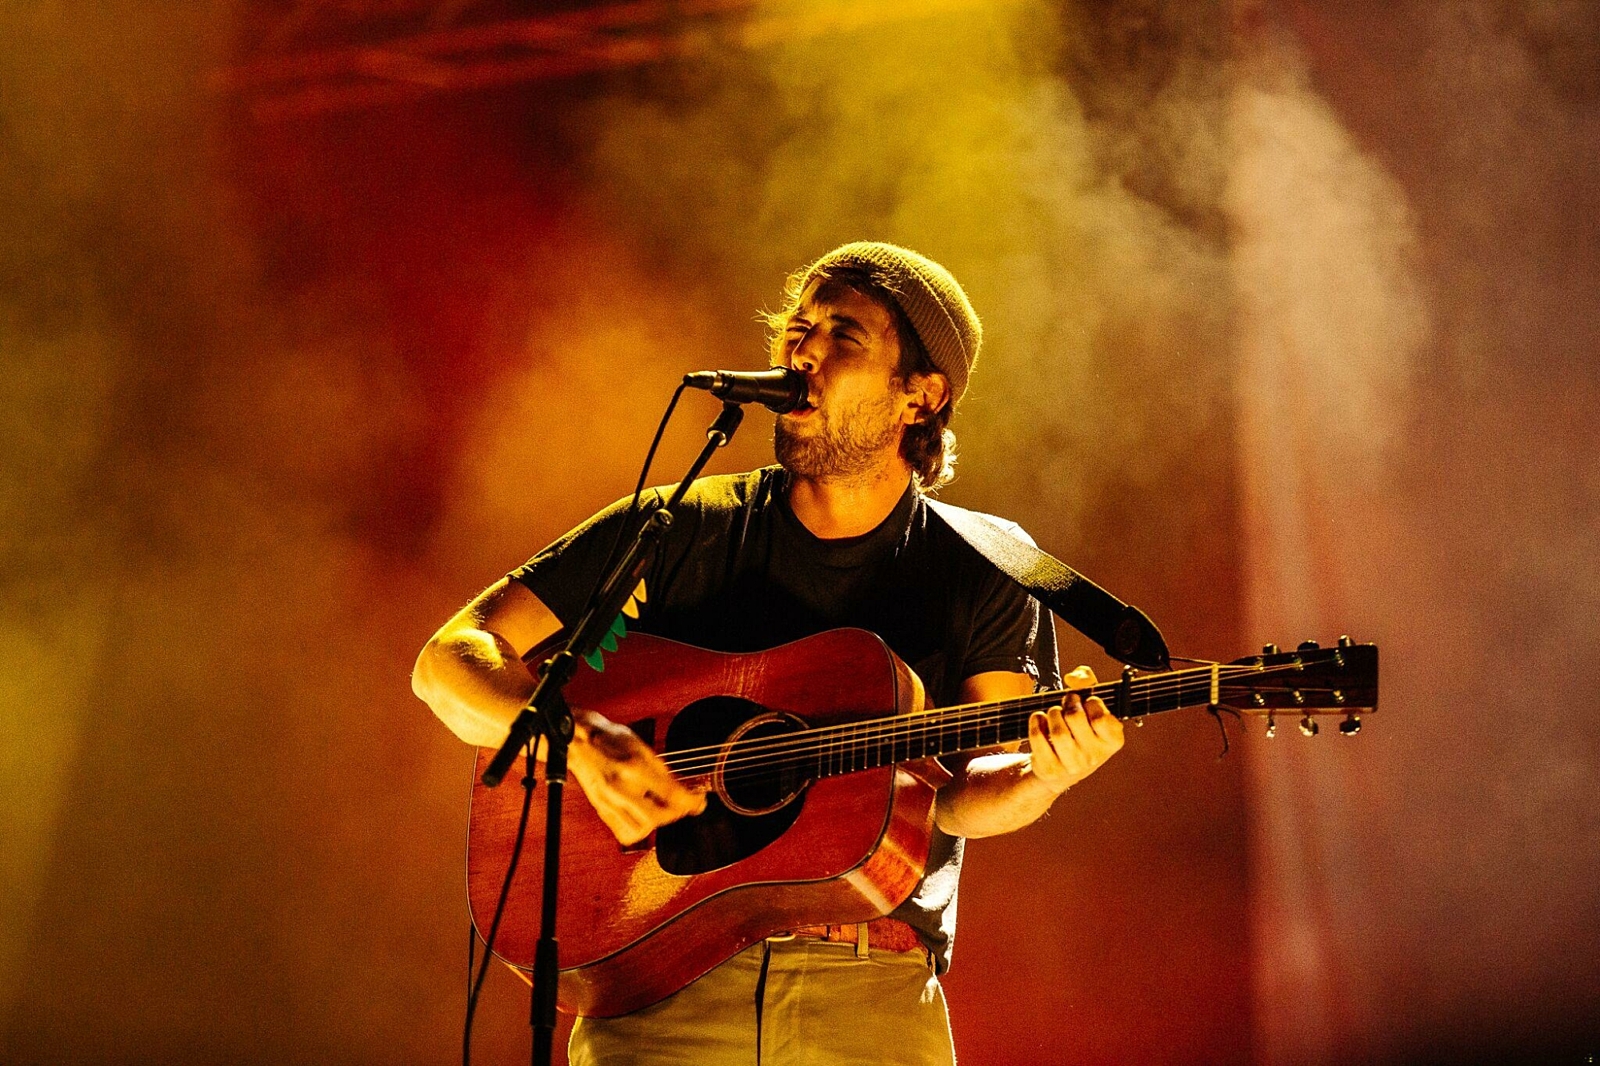 Fleet Foxes, The War On Drugs and more are set for Green Man Festival 2018